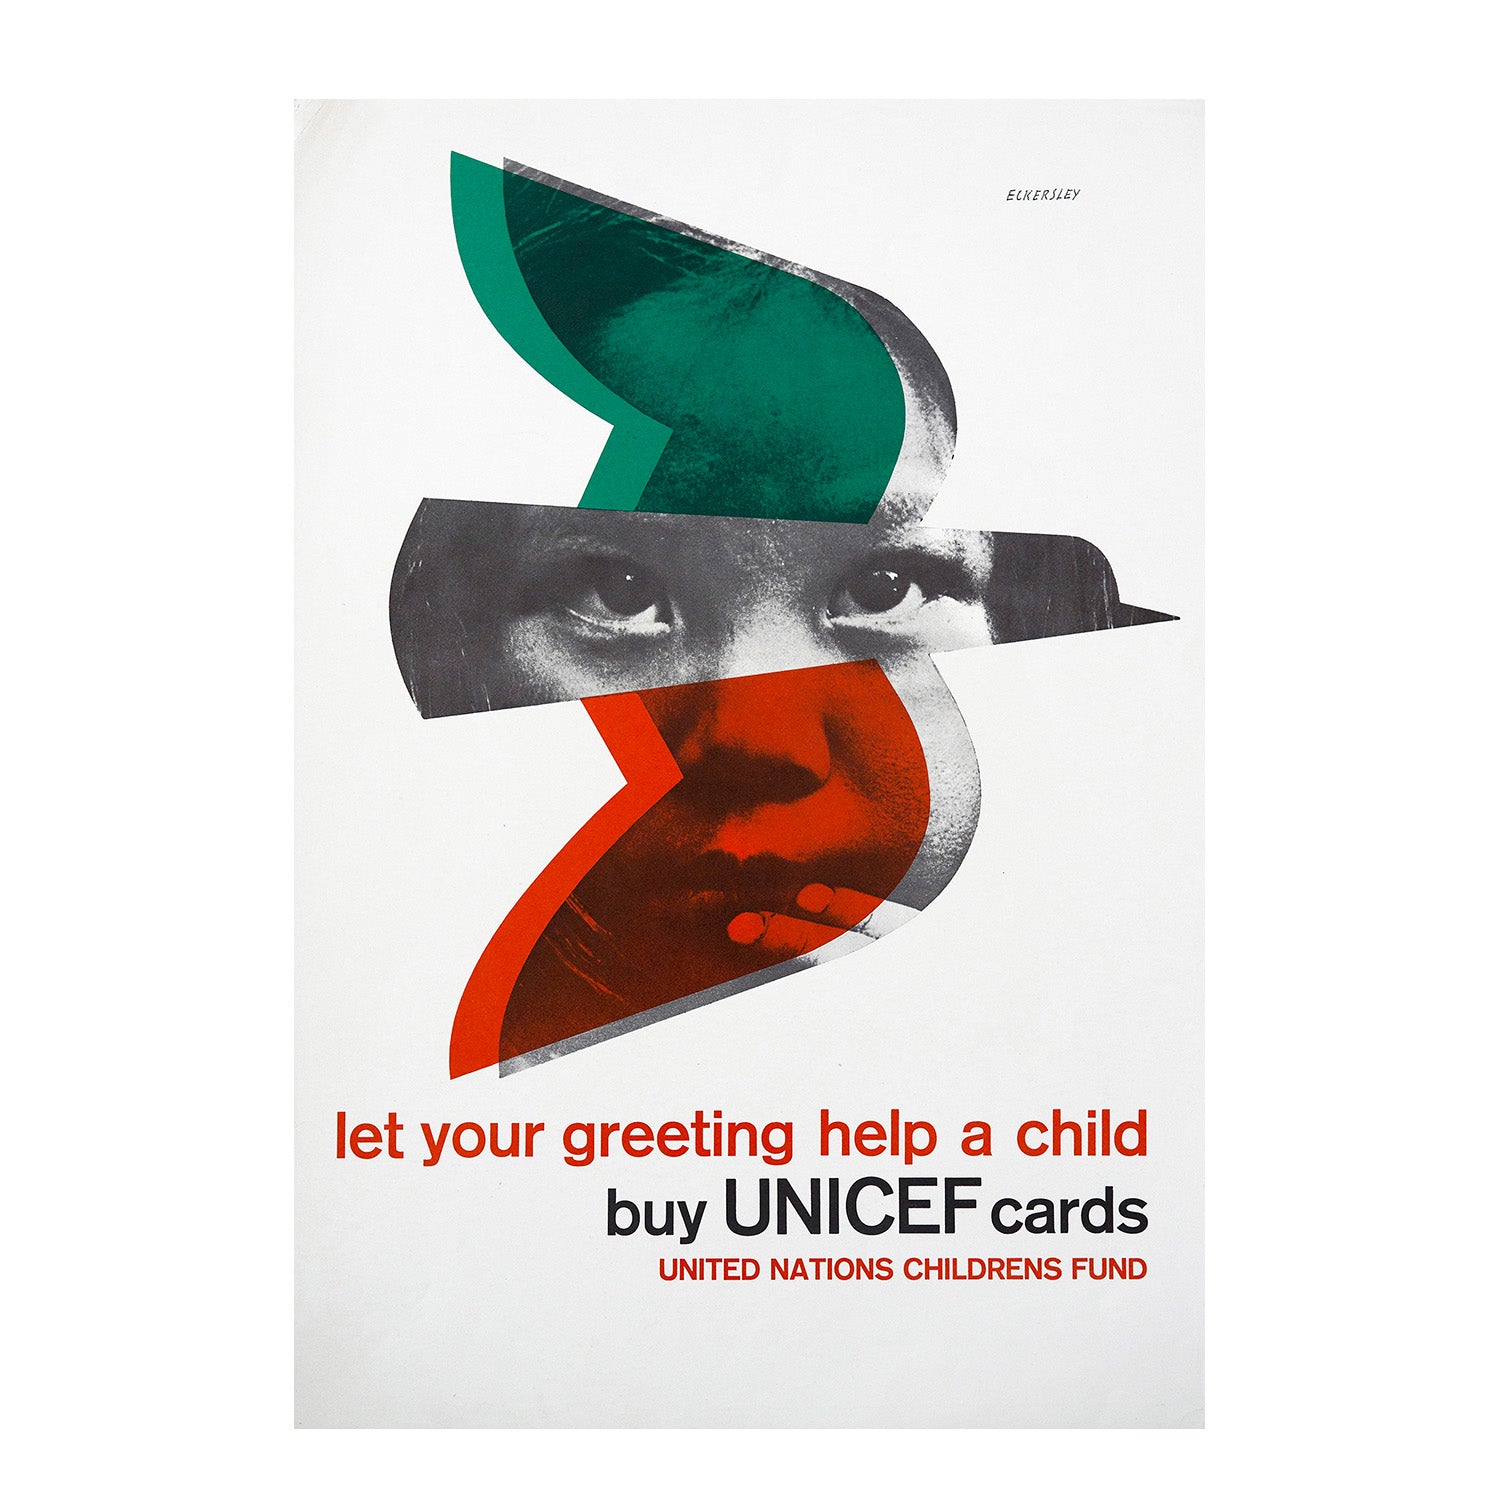 Let your greeting help a child. Buy UNICEF cards